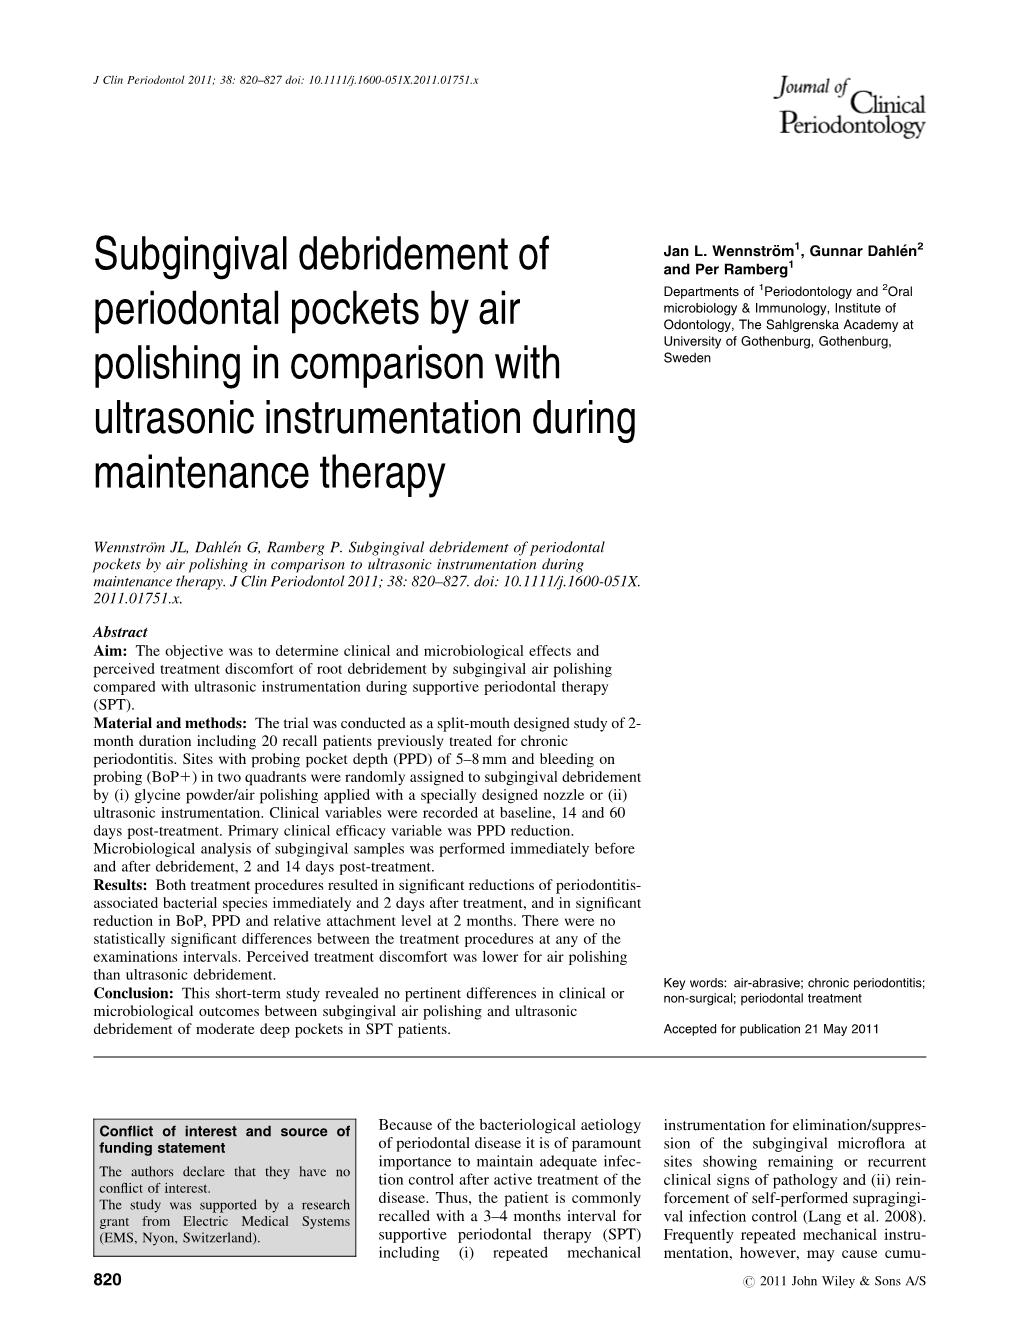 Subgingival Debridement of Periodontal Pockets by Air Polishing in Comparison to Ultrasonic Instrumentation During Maintenance Therapy